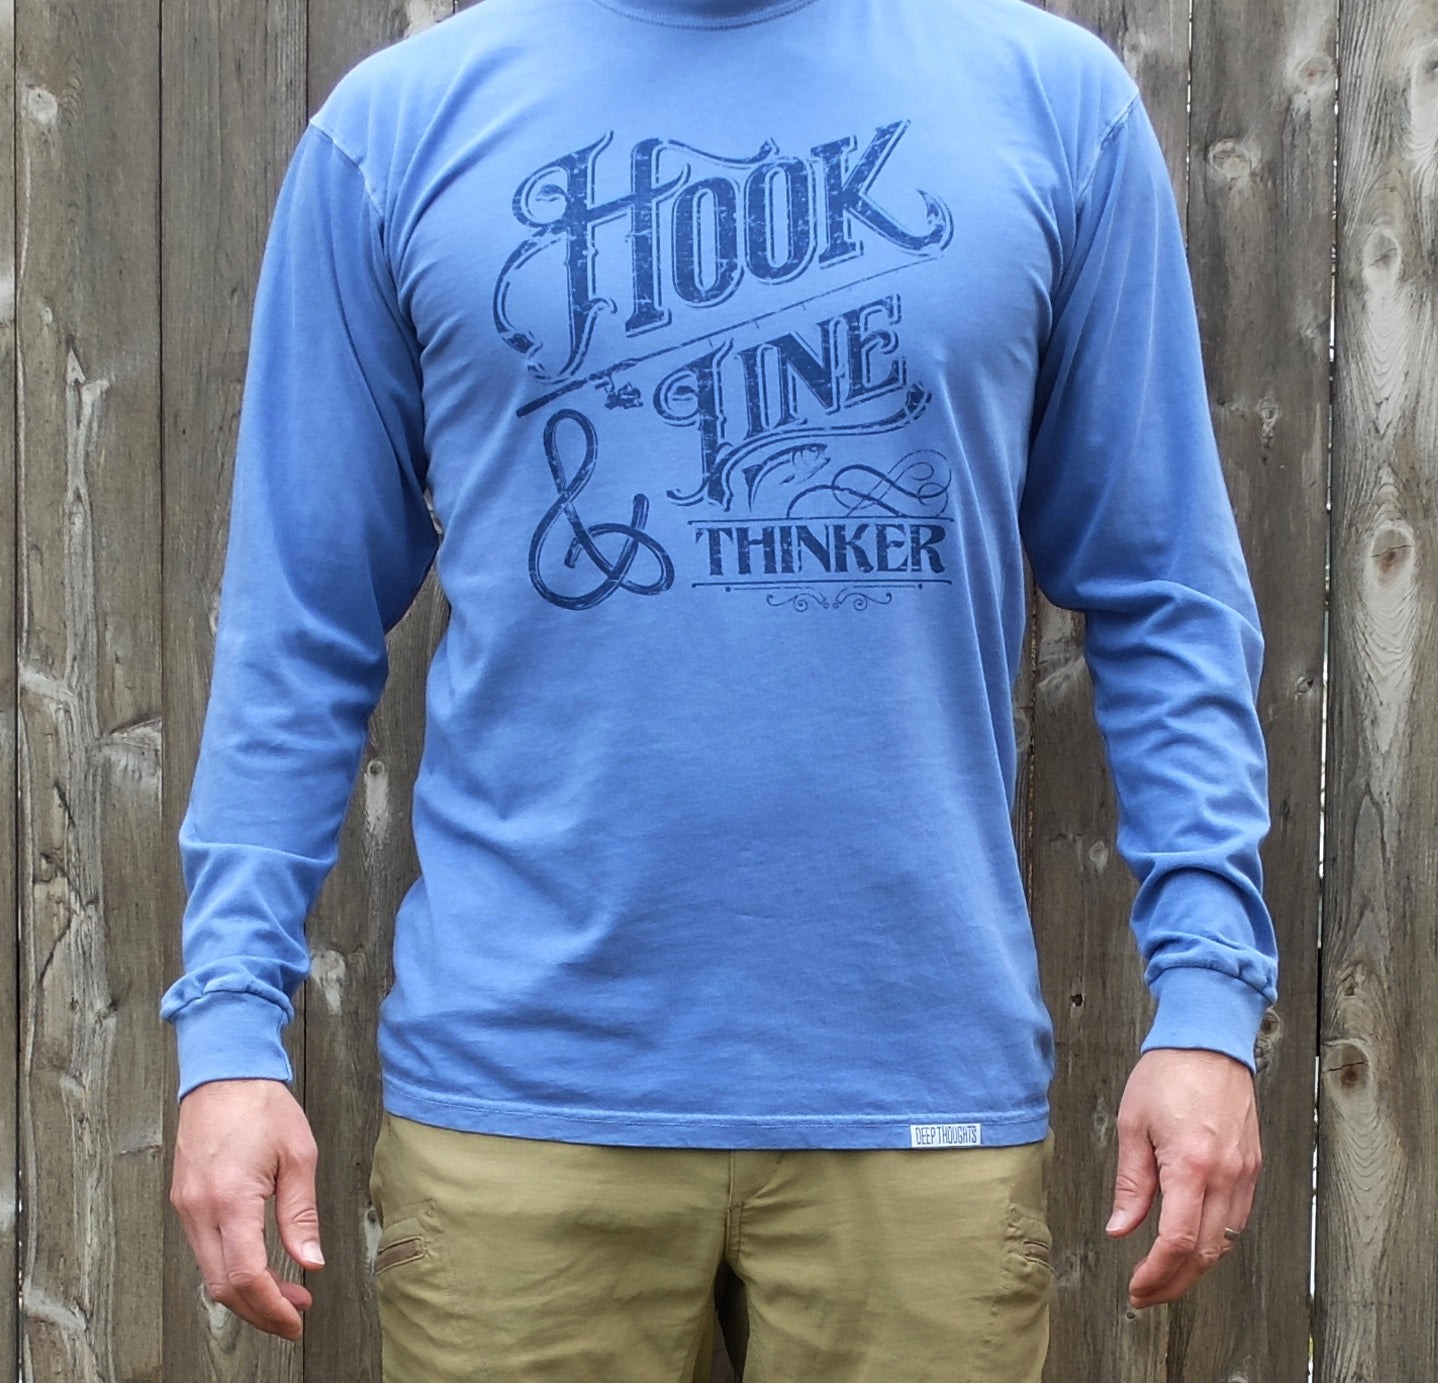 man wearing washed periwinkle blue long sleeve cotton t-shirt with navy blue hook line and thinker fishing graphic